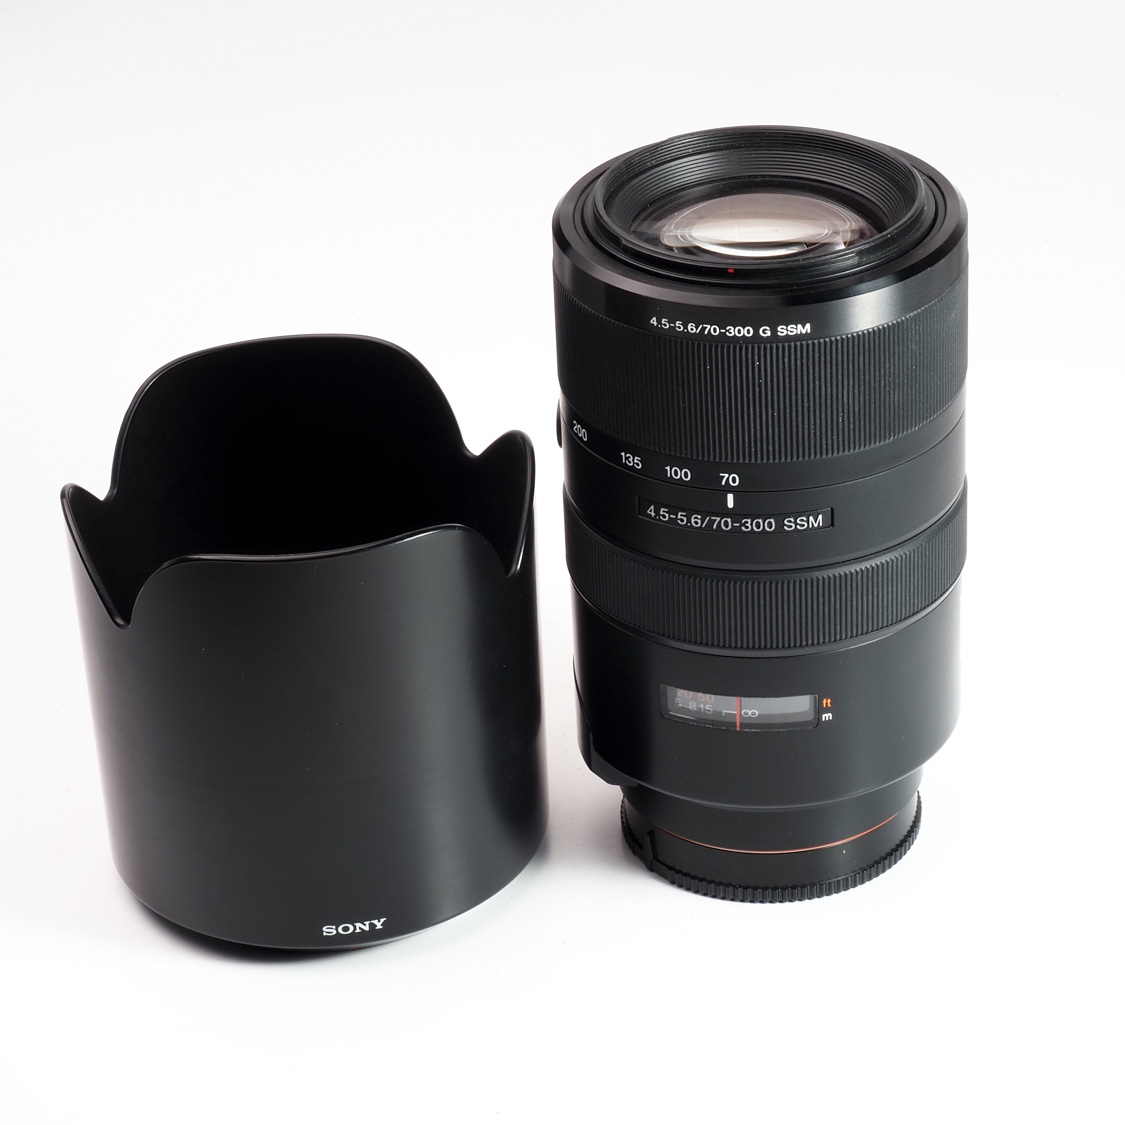 Sony 70-300mm f4.5-5.6 SSM G (EX) Used Lens for A Mount